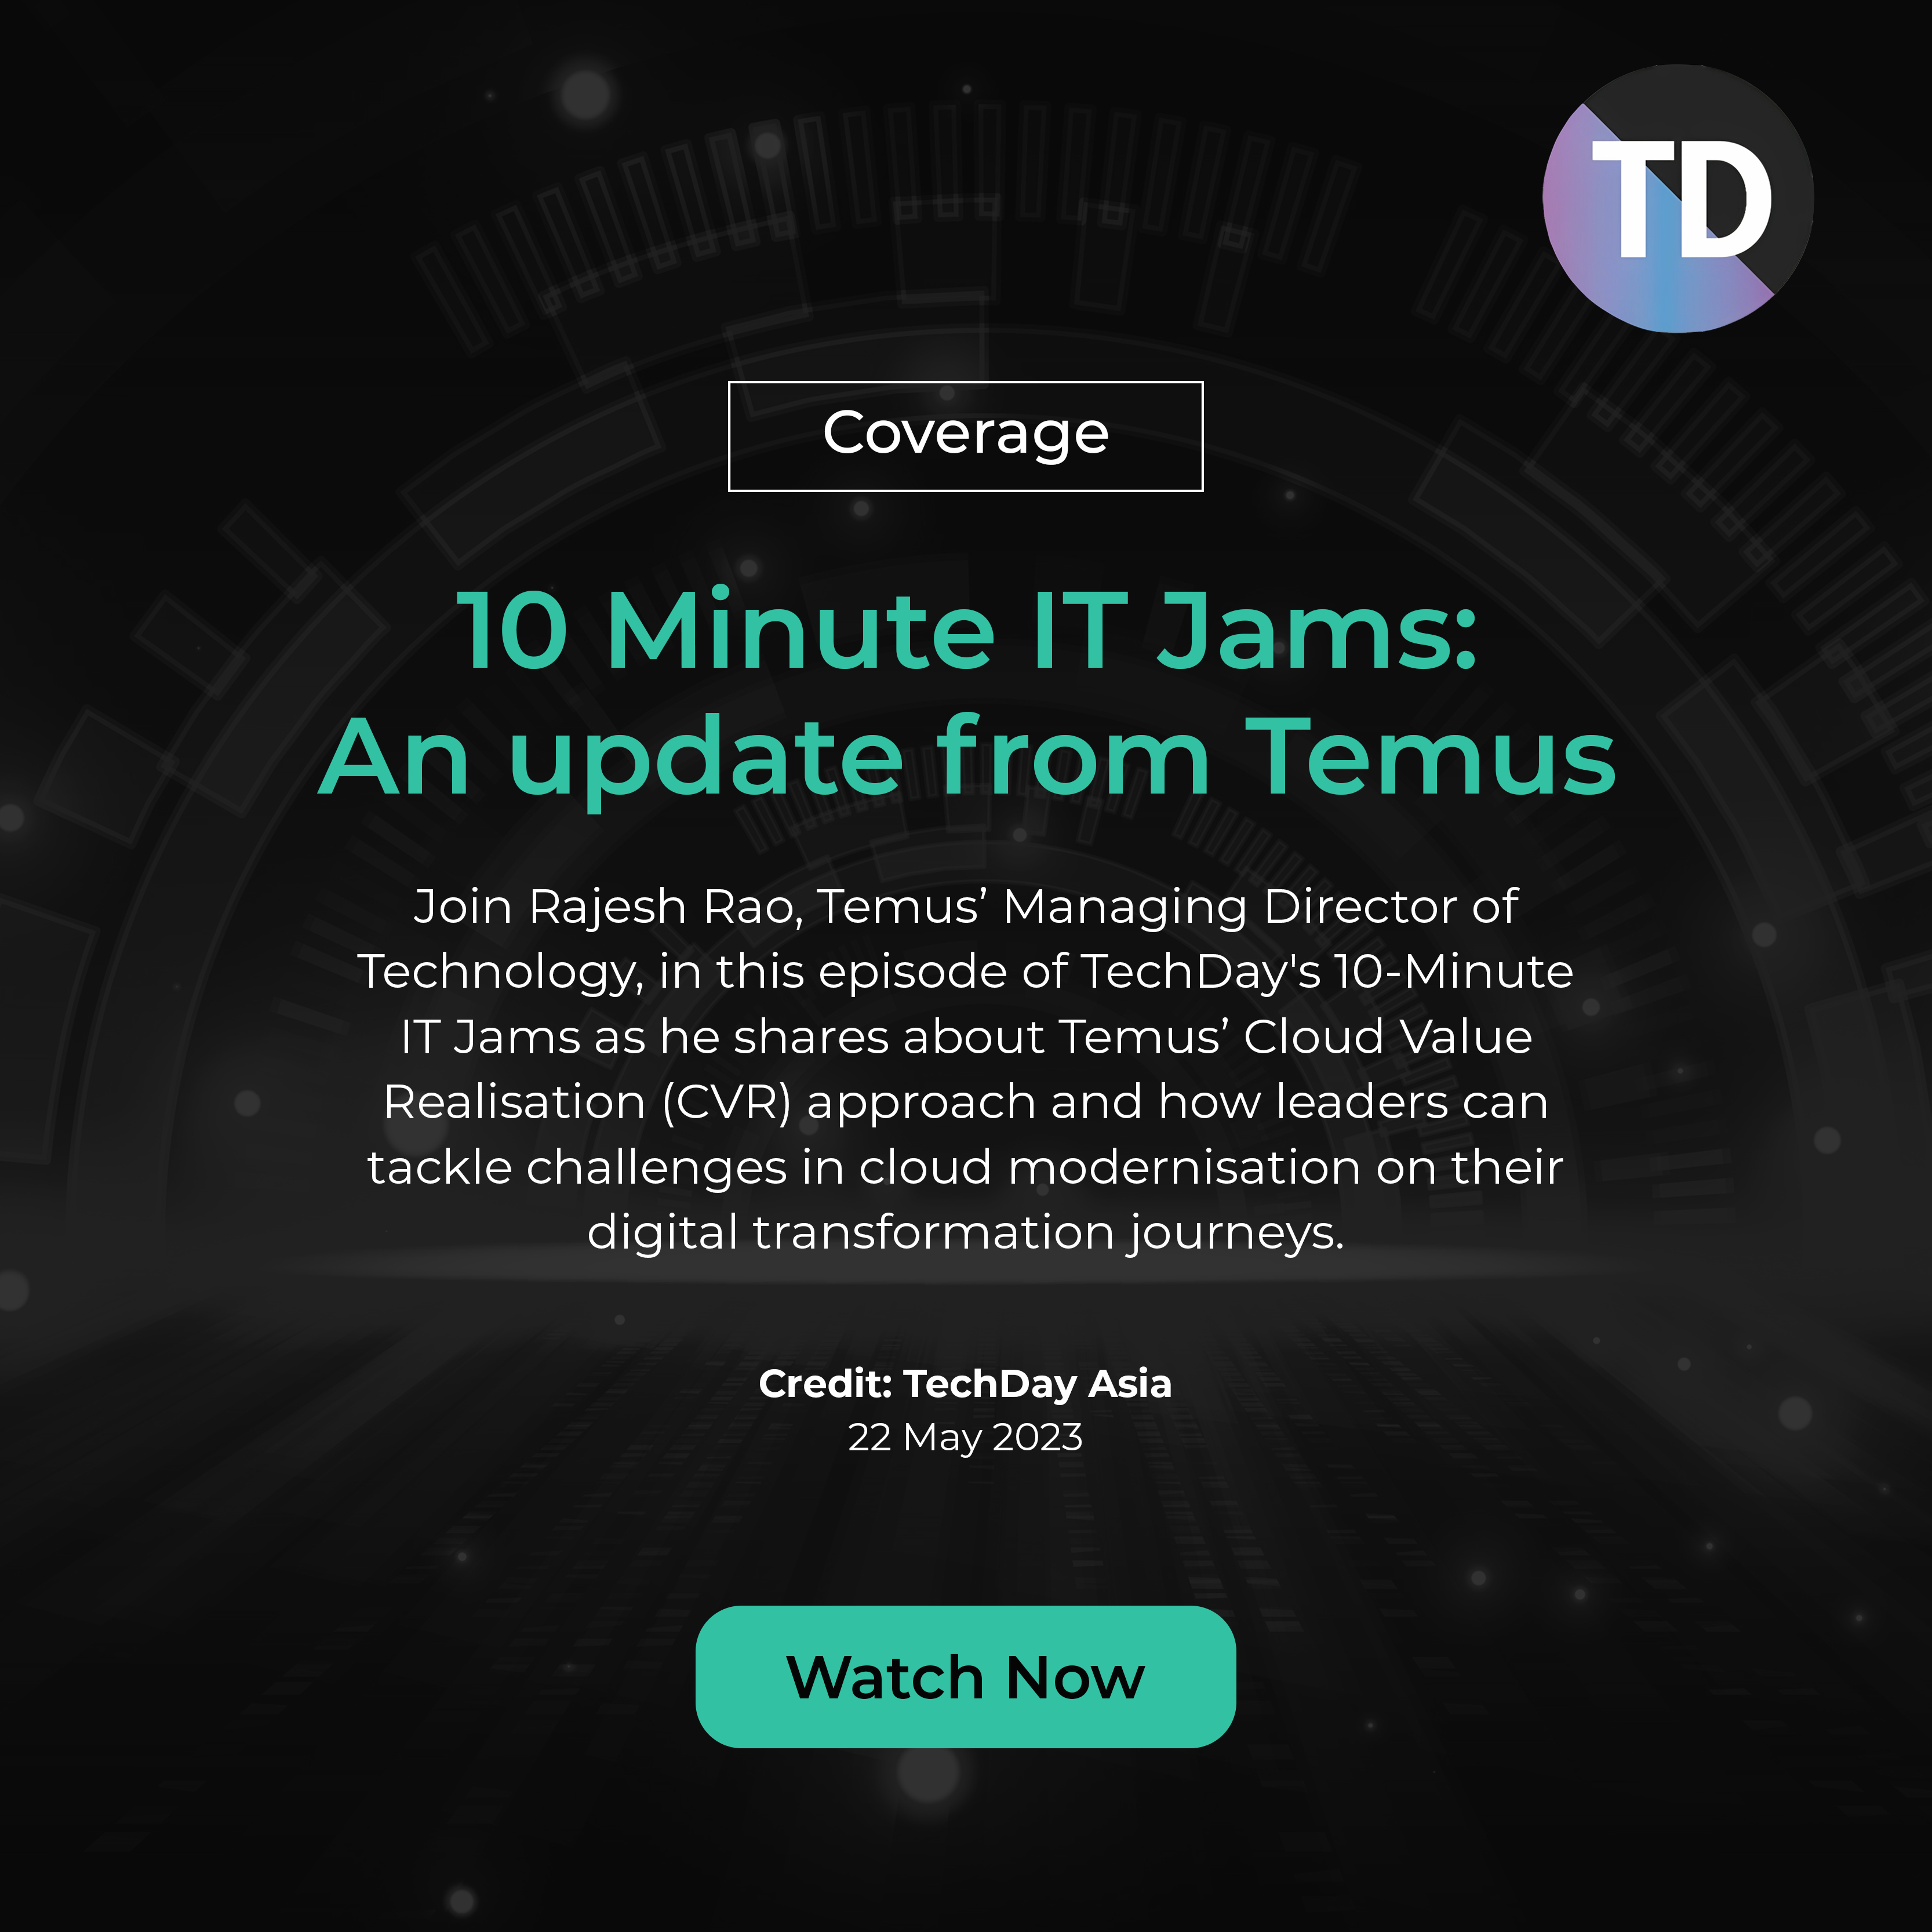 Coverage: TechDay Asia's 10 Minute IT Jams (Rajesh)